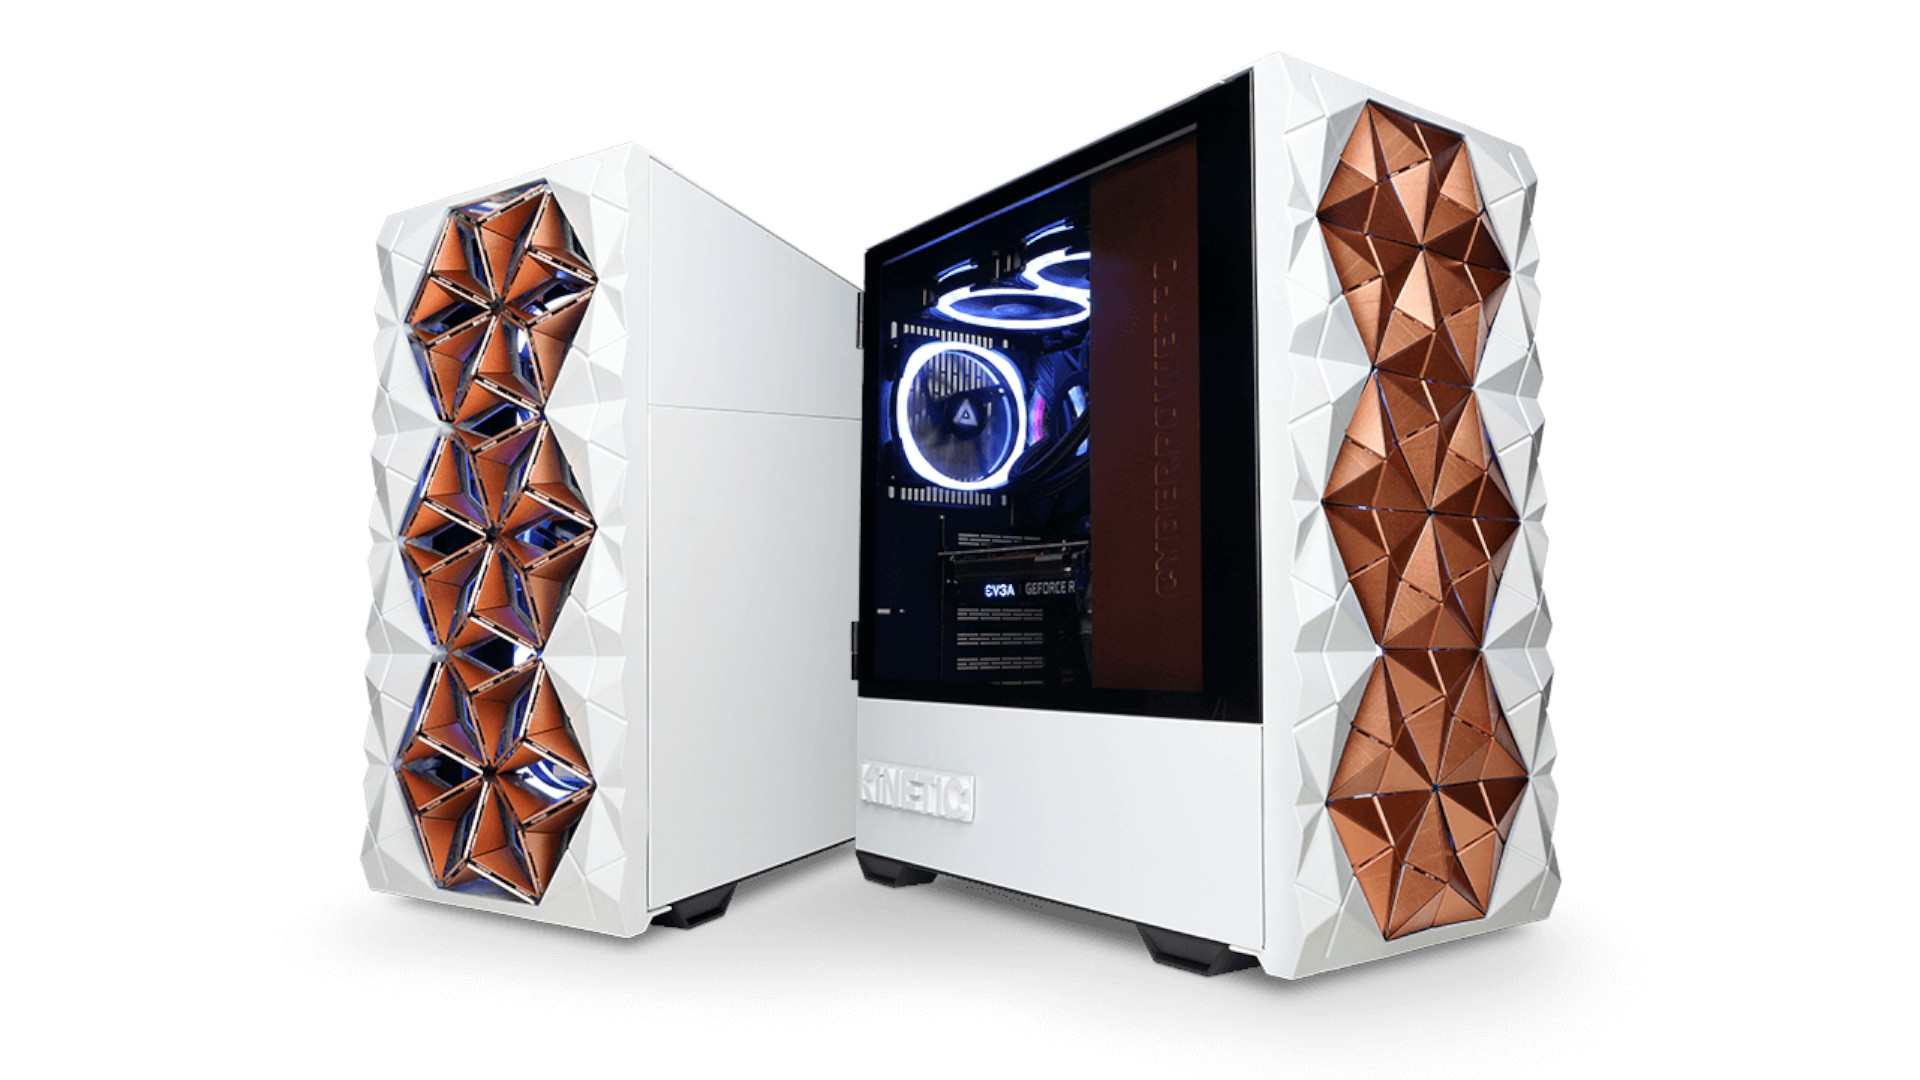 CyberPowerPC hopes to breathe new life into PC case design with its Kinetic series